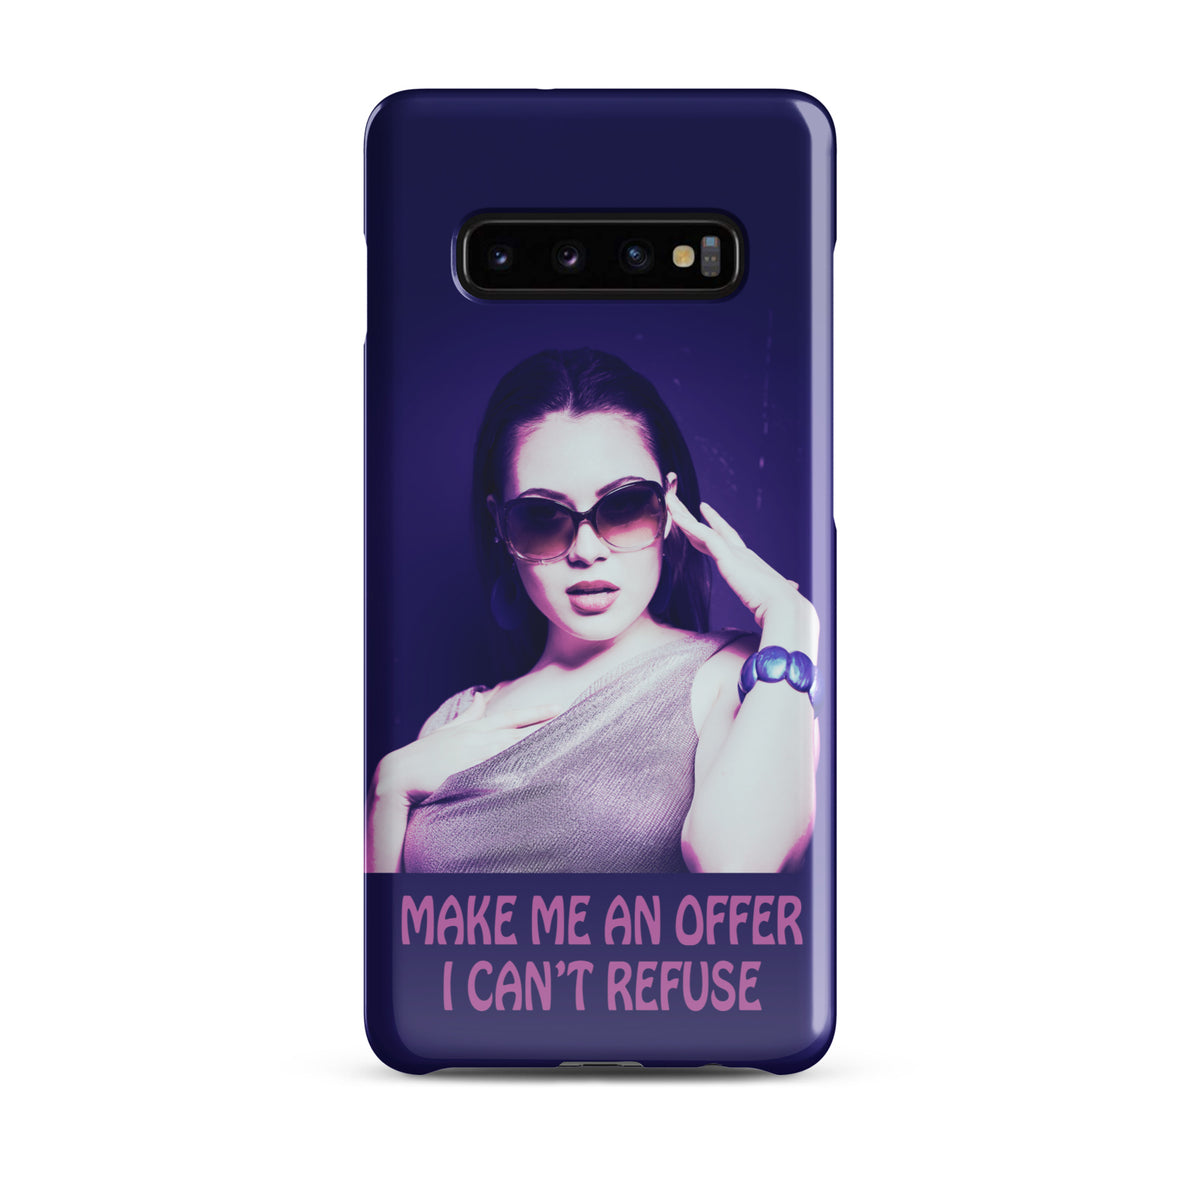  Samsung Phone case with a purple wrap and an image of a young woman in sunglasses. There is pink text that reads Make Me An Offer I Can't Refuse